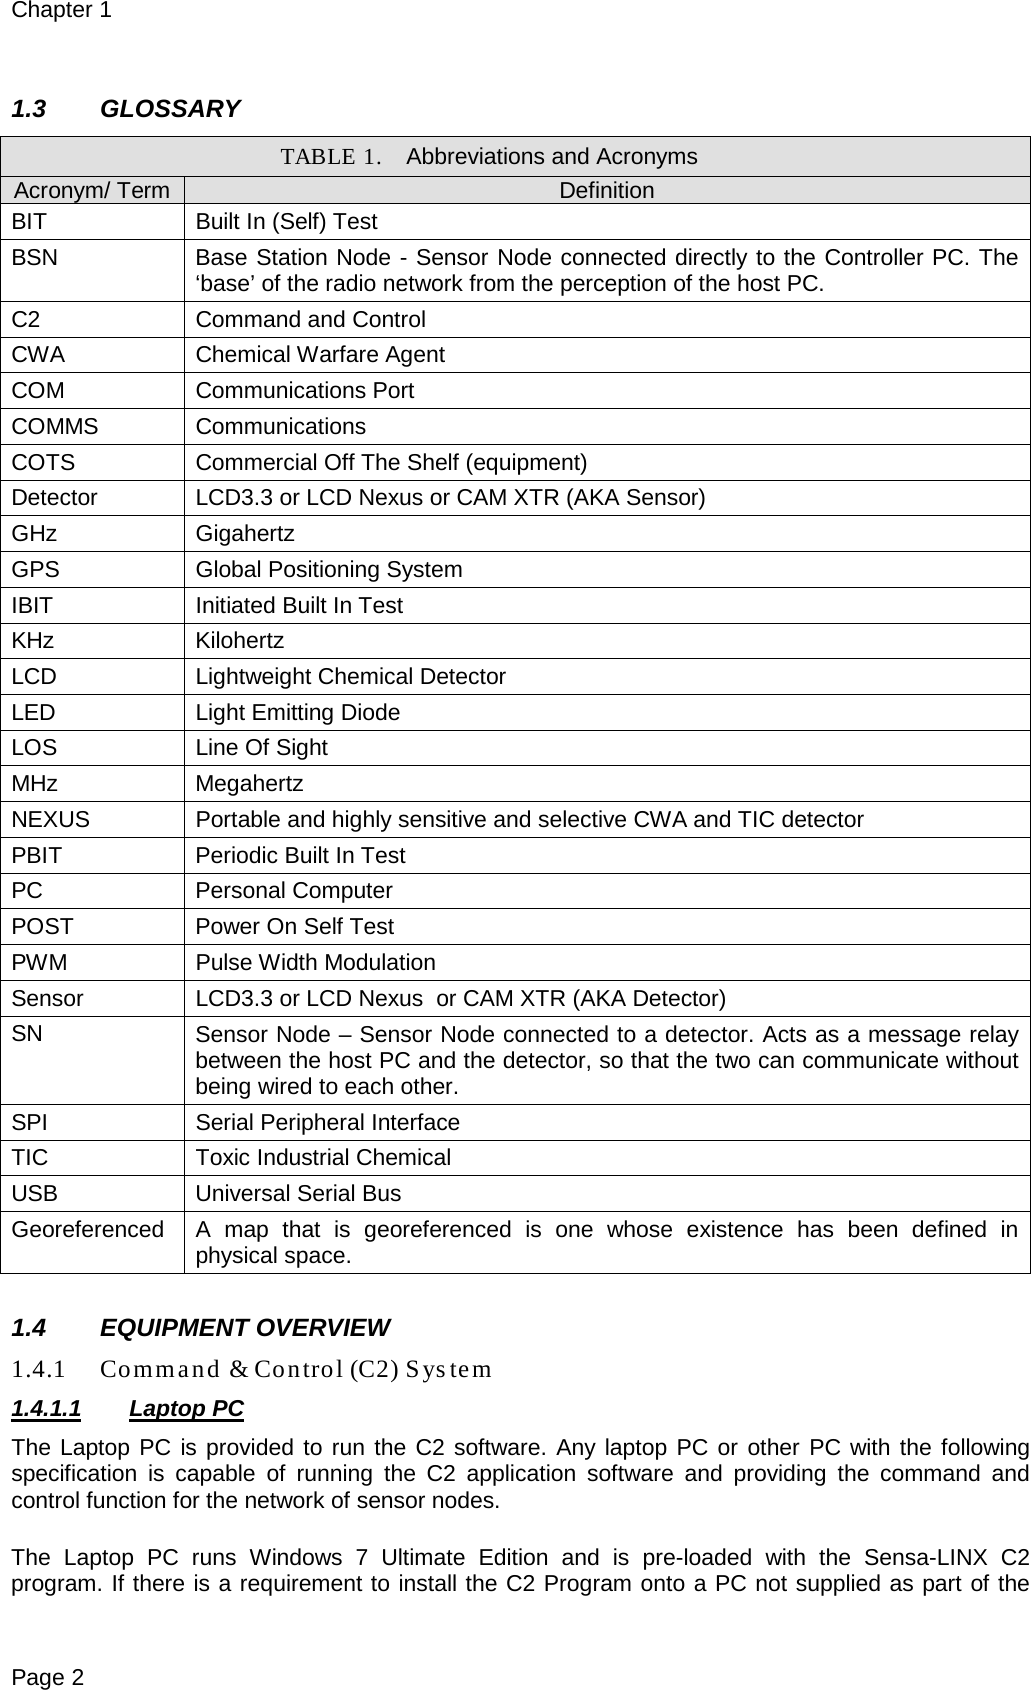 Chapter 1 Page 2  1.3 GLOSSARY TABLE 1. Abbreviations and Acronyms Acronym/ Term Definition BIT Built In (Self) Test BSN Base Station Node - Sensor Node connected directly to the Controller PC. The ‘base’ of the radio network from the perception of the host PC. C2 Command and Control CWA Chemical Warfare Agent COM Communications Port COMMS Communications COTS Commercial Off The Shelf (equipment) Detector LCD3.3 or LCD Nexus or CAM XTR (AKA Sensor) GHz Gigahertz GPS Global Positioning System IBIT  Initiated Built In Test KHz Kilohertz LCD Lightweight Chemical Detector LED Light Emitting Diode LOS Line Of Sight MHz Megahertz NEXUS Portable and highly sensitive and selective CWA and TIC detector PBIT Periodic Built In Test PC Personal Computer POST Power On Self Test PWM Pulse Width Modulation Sensor LCD3.3 or LCD Nexus  or CAM XTR (AKA Detector) SN Sensor Node – Sensor Node connected to a detector. Acts as a message relay between the host PC and the detector, so that the two can communicate without being wired to each other. SPI Serial Peripheral Interface TIC Toxic Industrial Chemical USB Universal Serial Bus Georeferenced A map that is georeferenced is one whose existence has been defined in physical space.  1.4 EQUIPMENT OVERVIEW 1.4.1 Command &amp; Control (C2) System 1.4.1.1 Laptop PC The Laptop PC is provided to run the C2 software. Any laptop PC or other PC with the following specification is capable of running the C2 application software and providing the command and control function for the network of sensor nodes.  The Laptop PC  runs Windows 7 Ultimate Edition and is pre-loaded with the Sensa-LINX C2 program. If there is a requirement to install the C2 Program onto a PC not supplied as part of the 